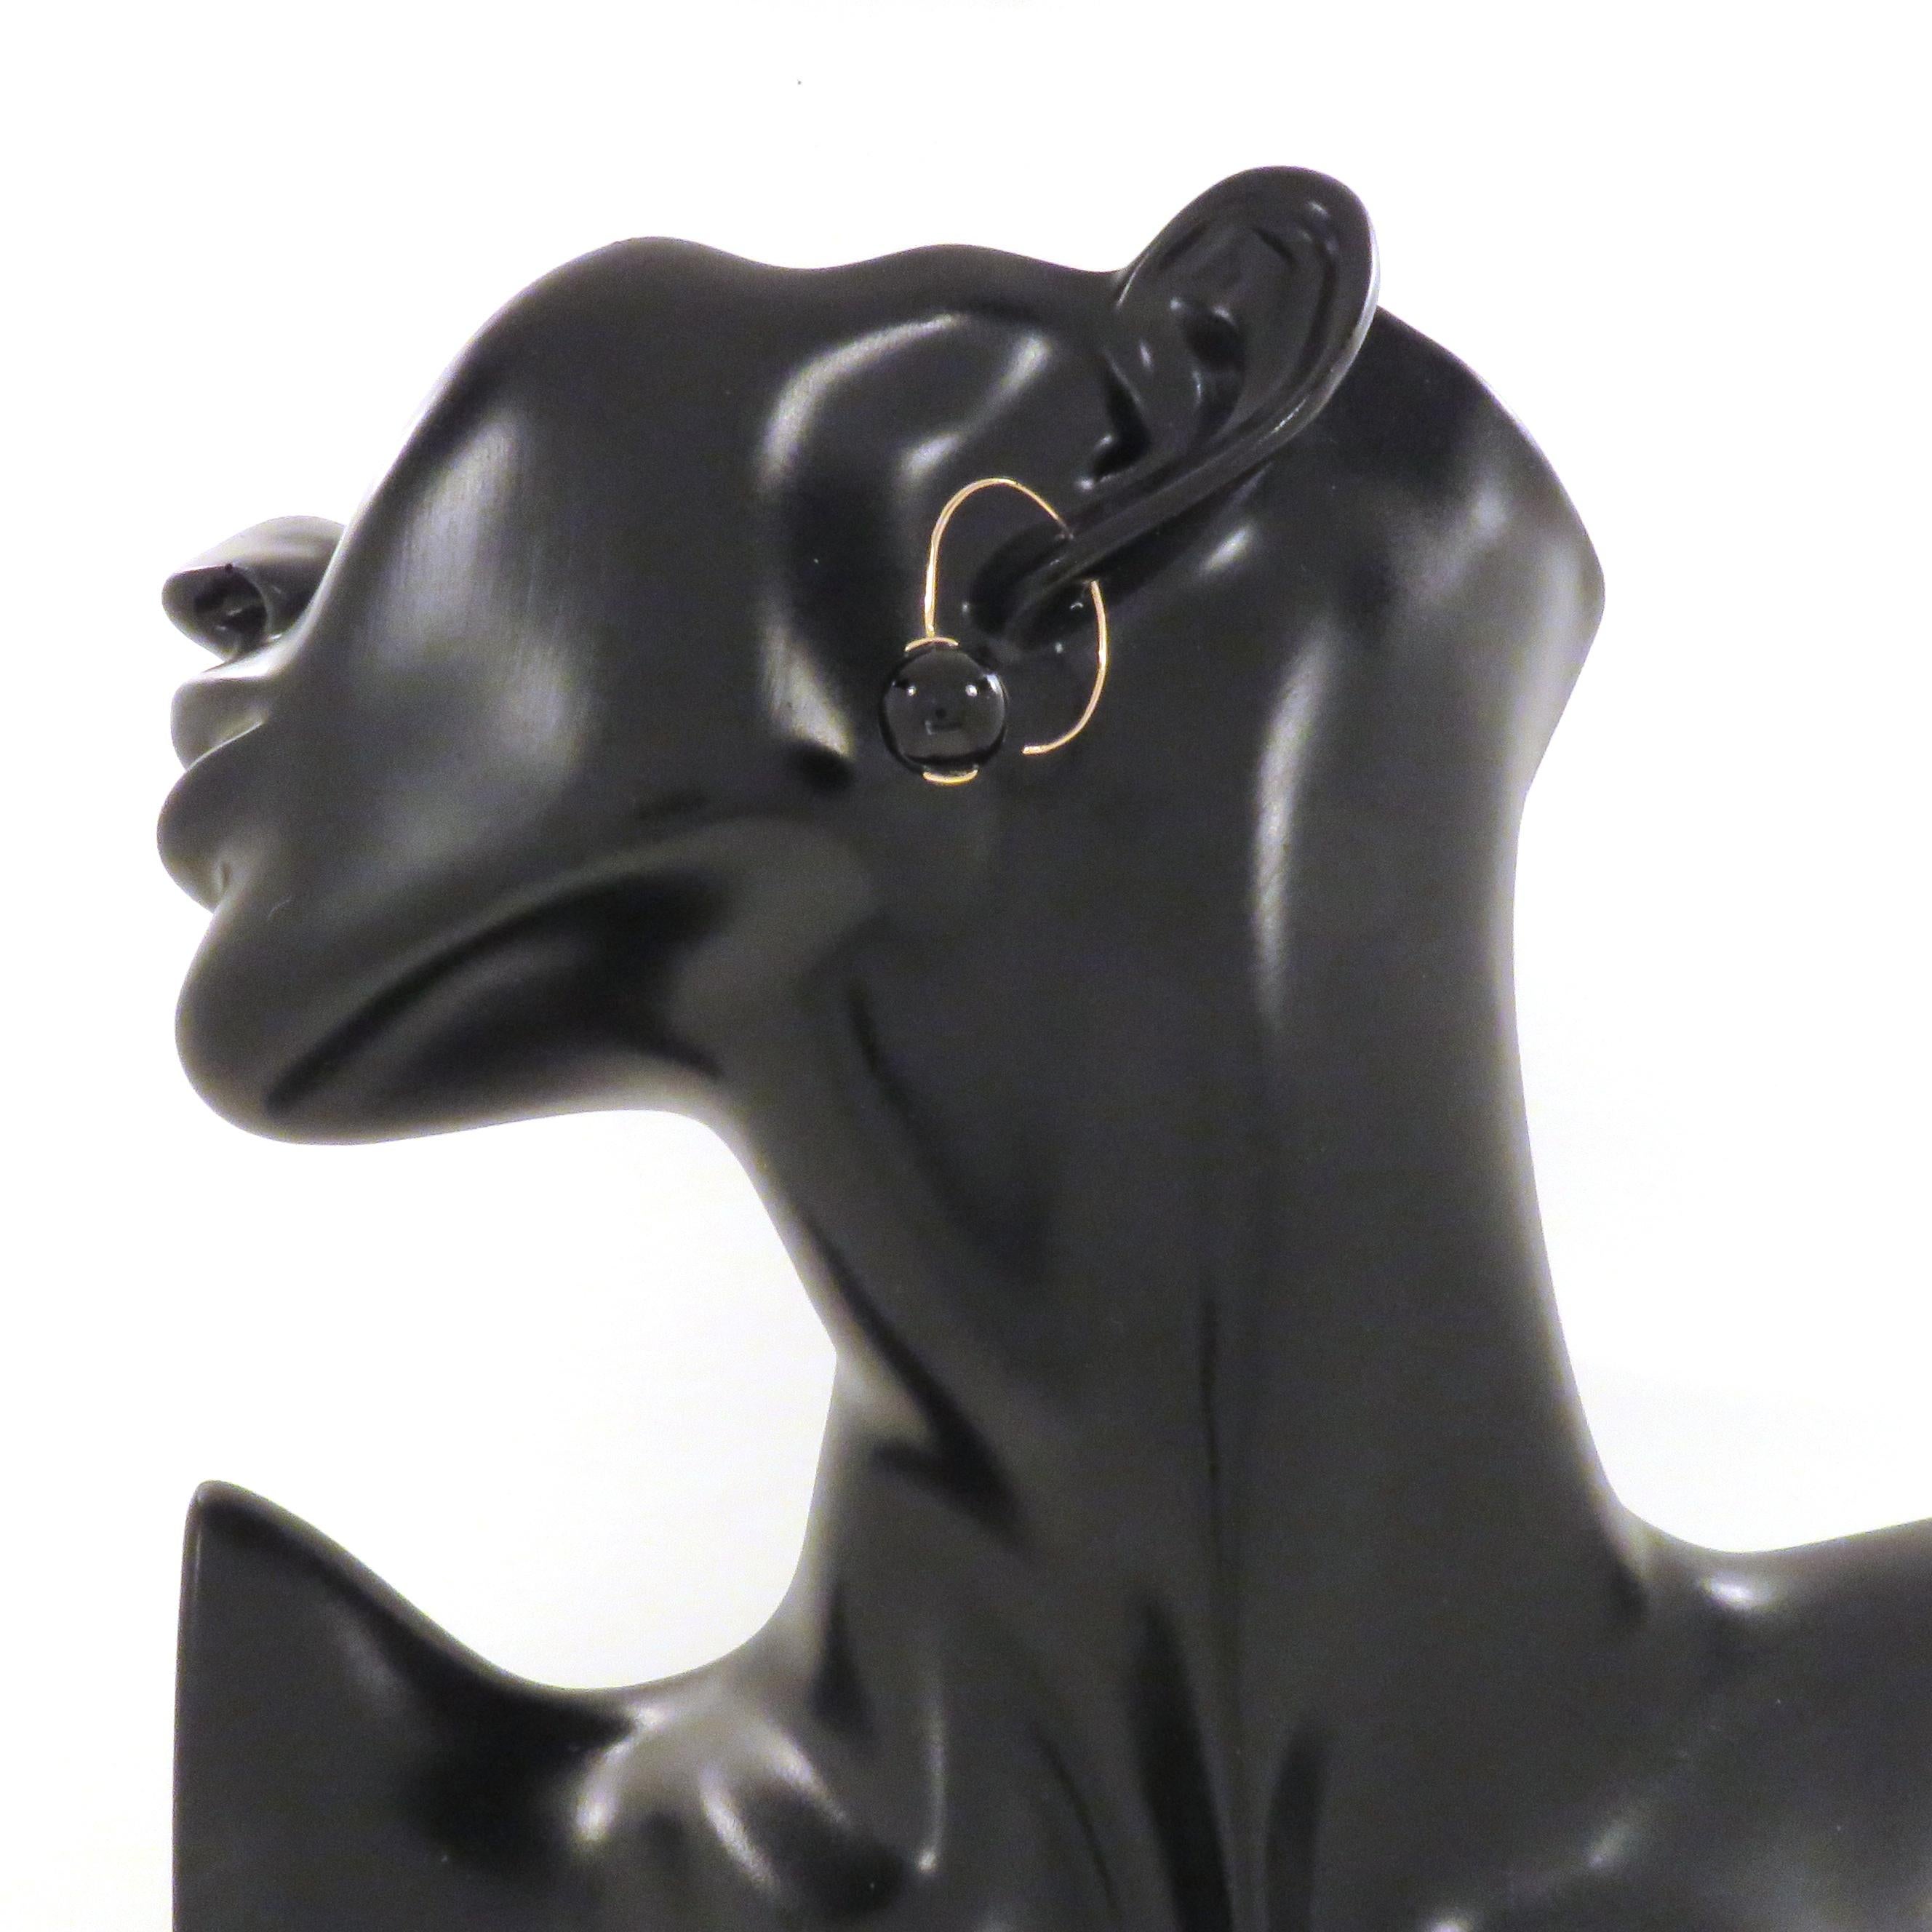 Earrings handmade in 9 carat rose gold with bead cut onyx diameter 0.472 inches, hoop diameter 0.984 inches. Total weight: 7.7 gram. Marked with 9 carat gold mark and Botta Gioielli Italian mark 716MI.

Handmade in: 9 carat rose gold.
Bead cut onyx: